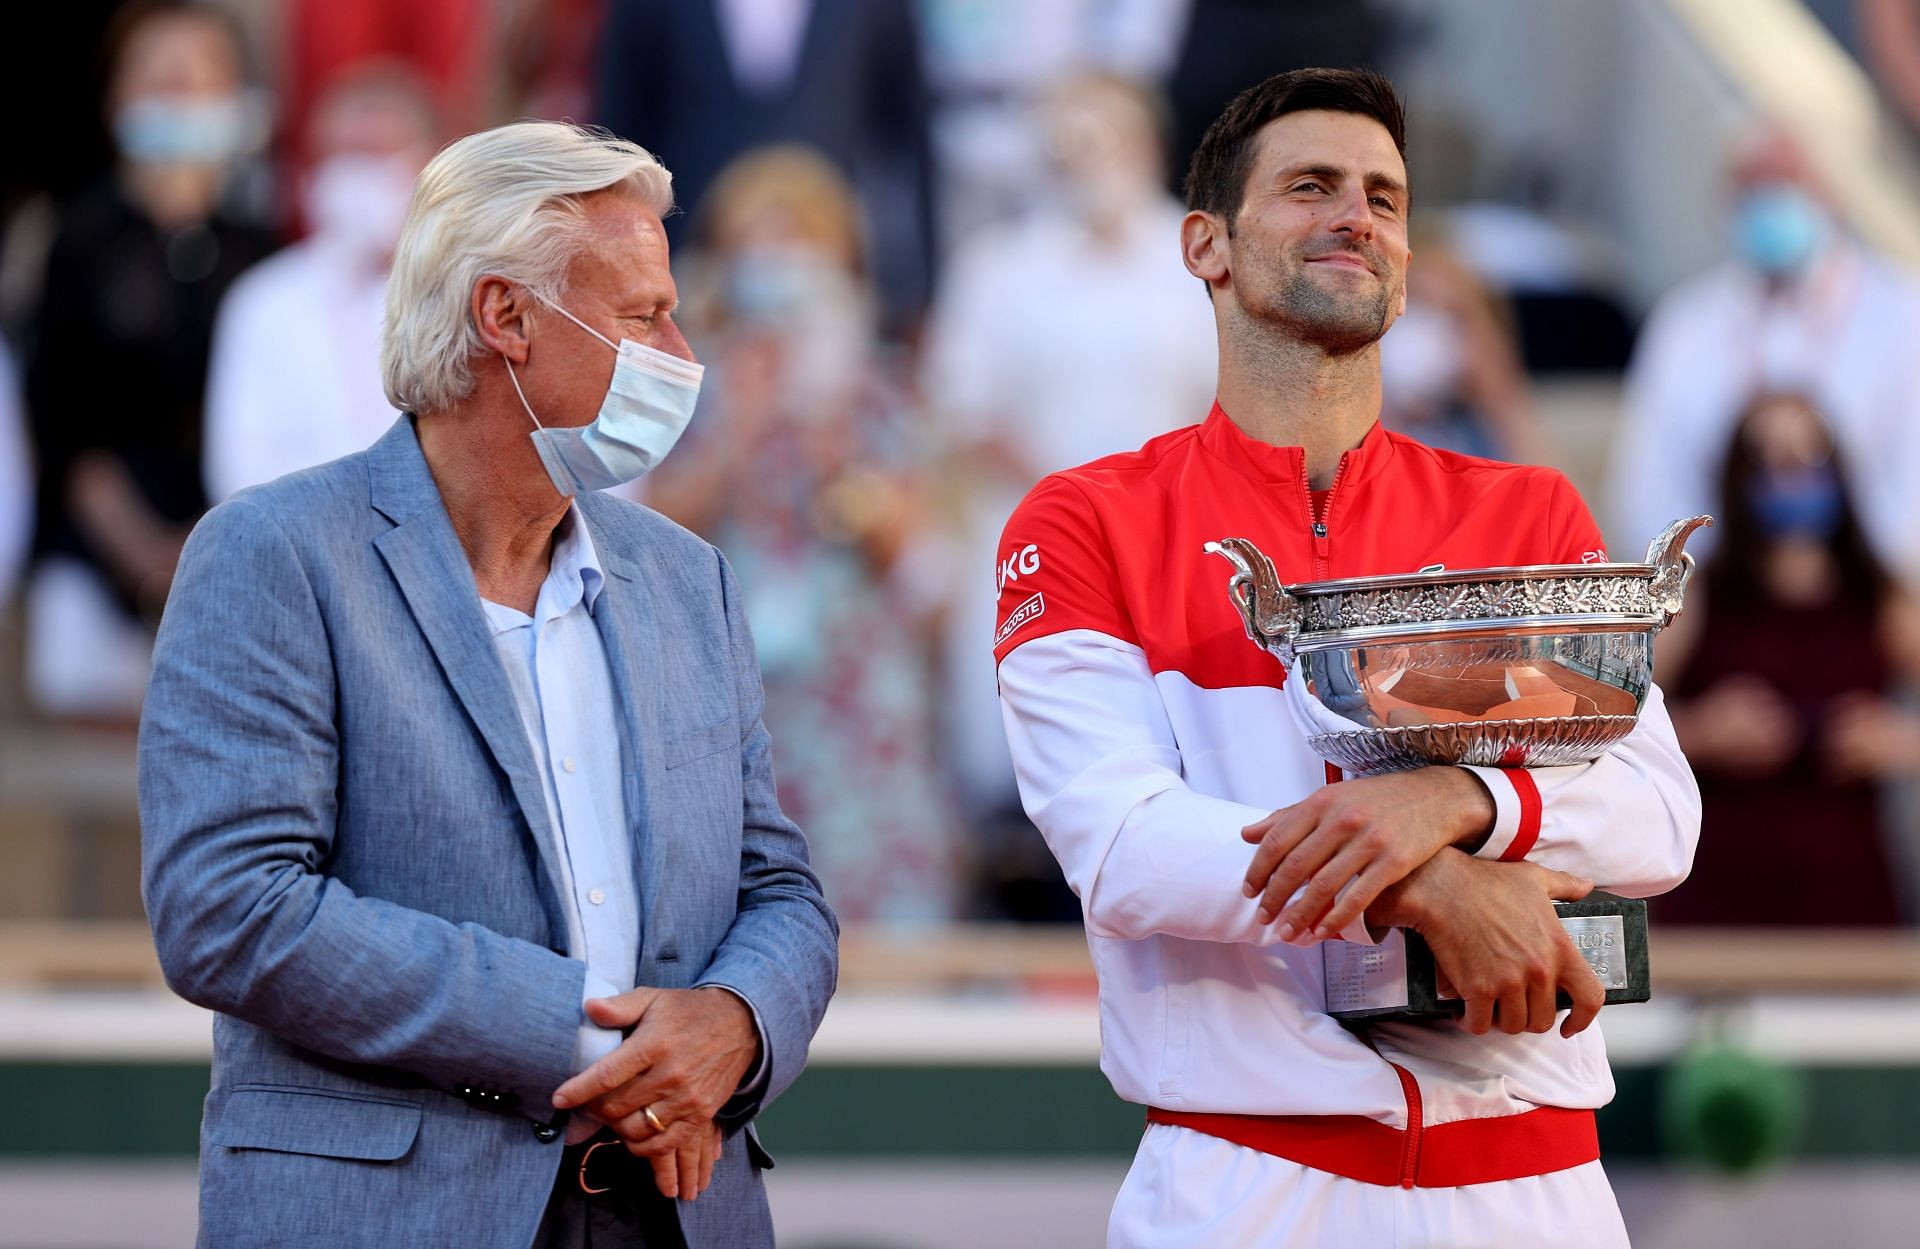 Novak Djokovic with the French Open title